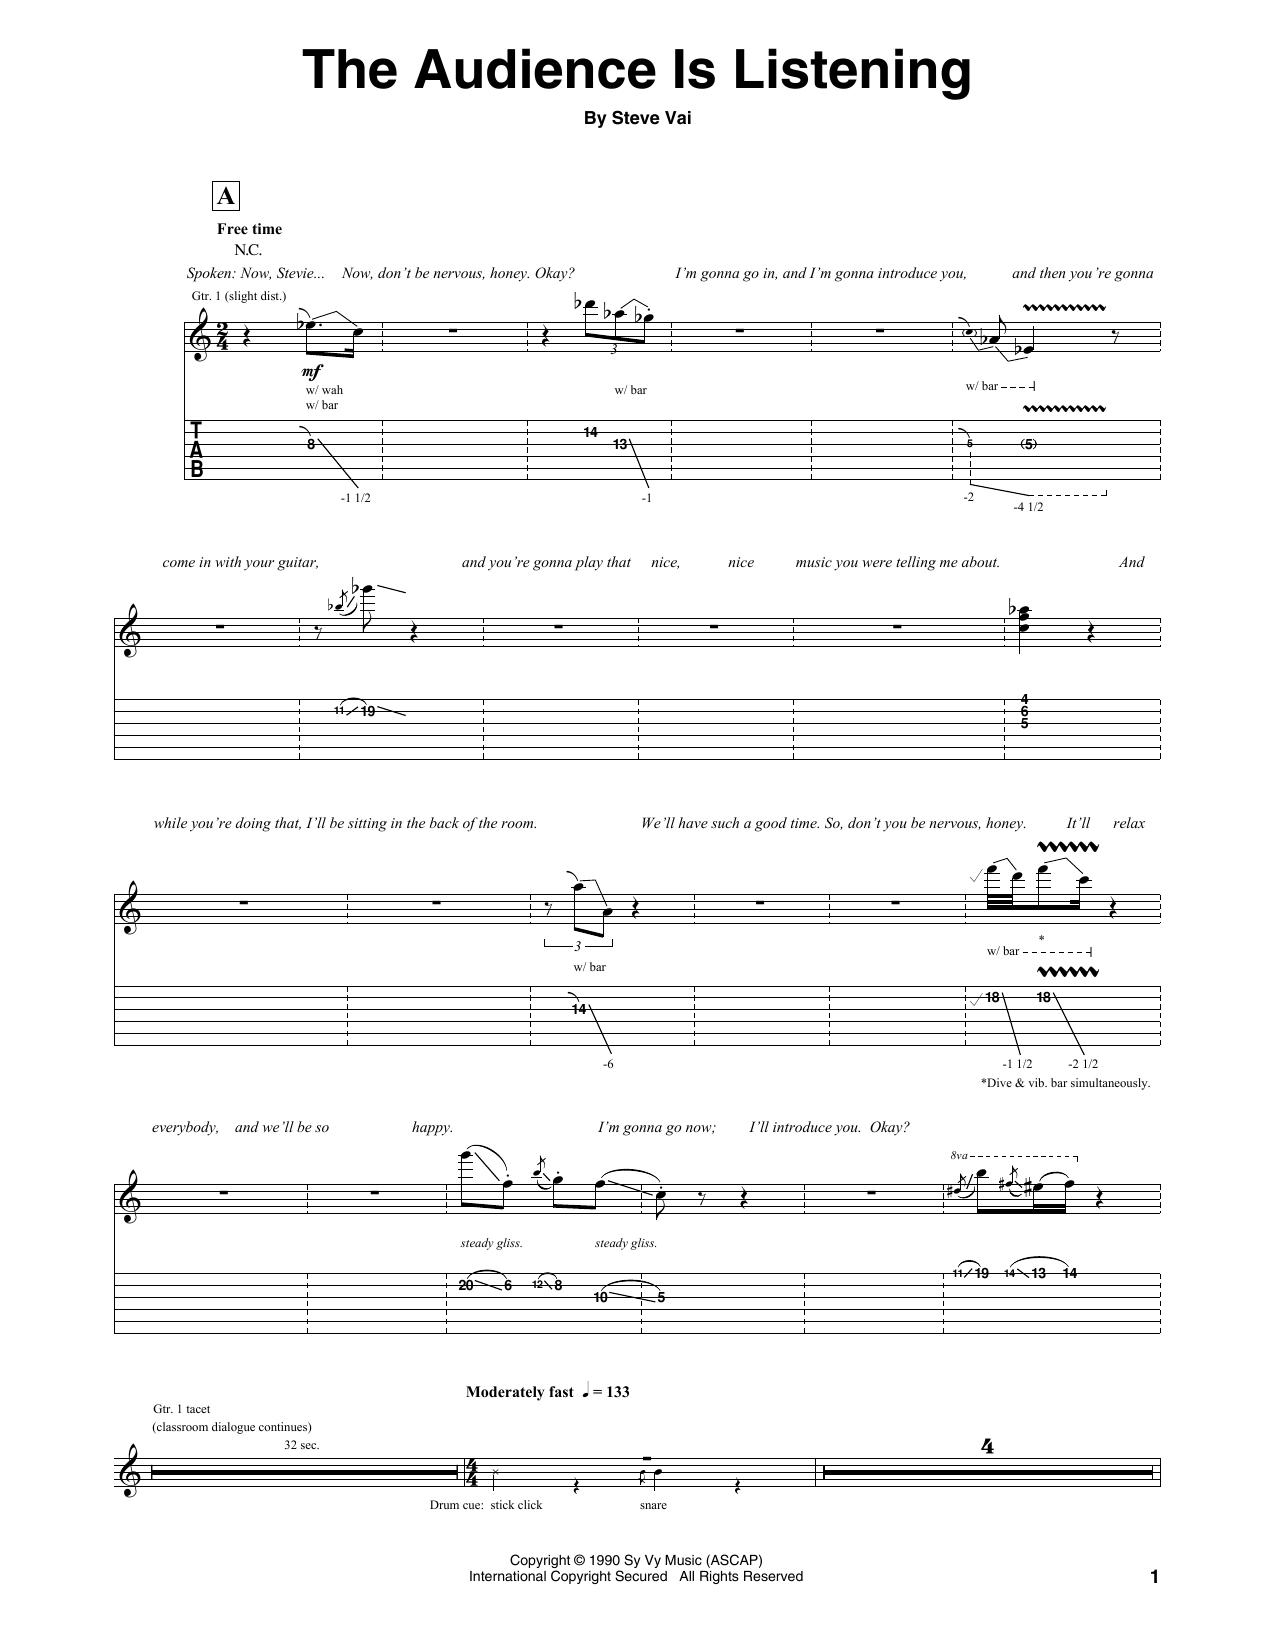 Download Steve Vai The Audience Is Listening Sheet Music